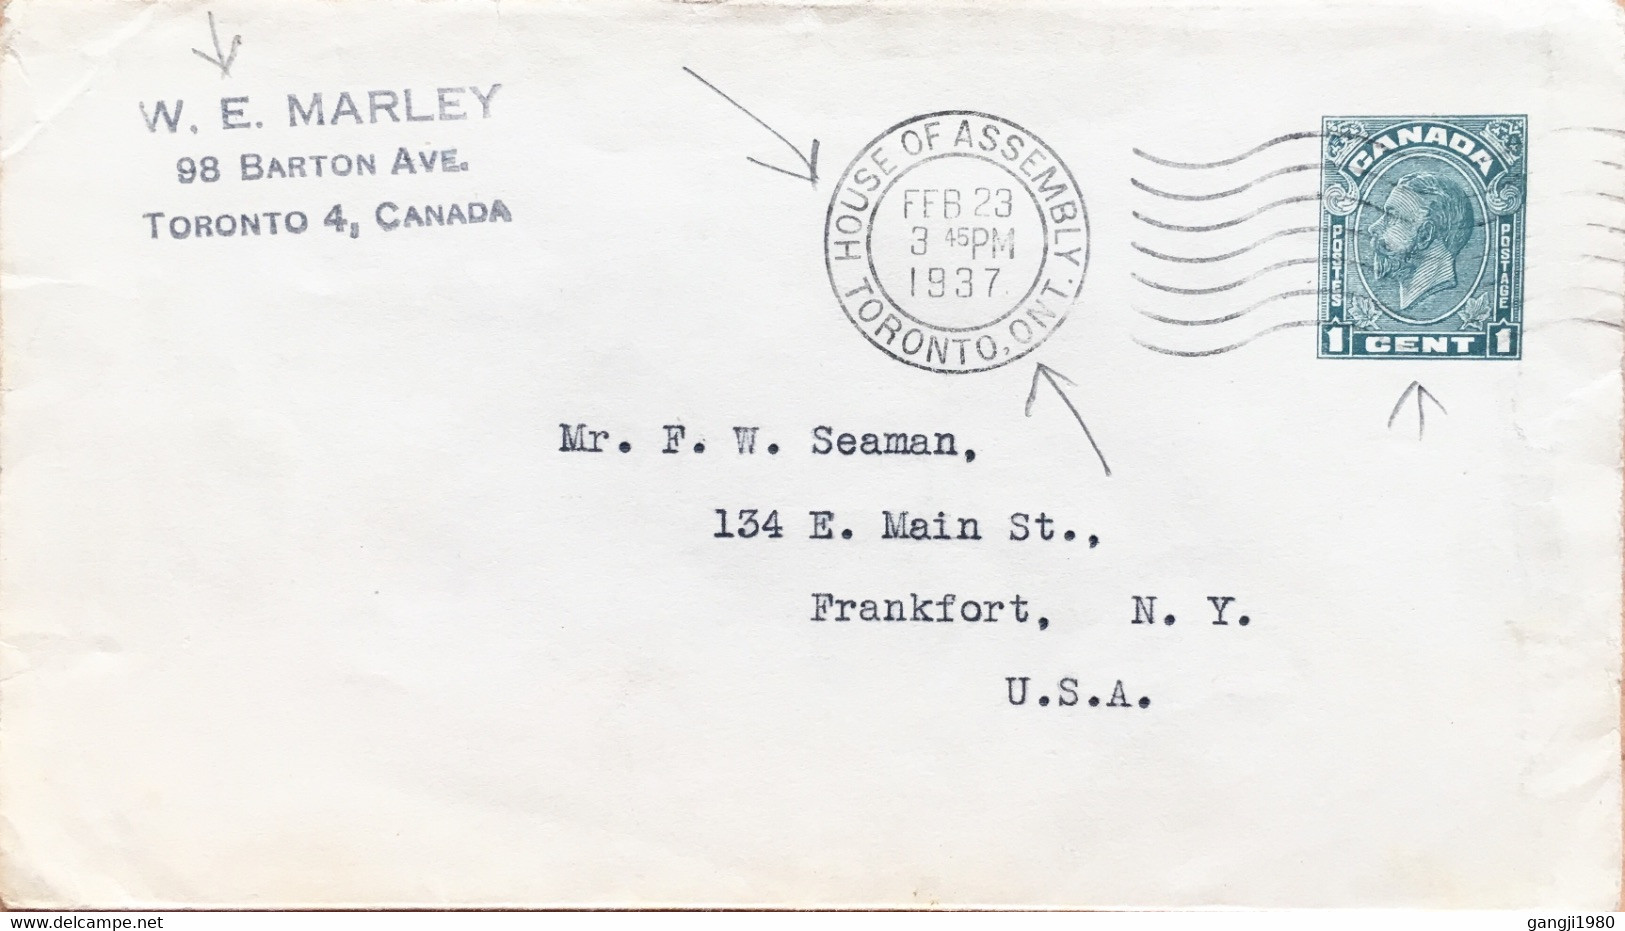 CANADA 1937, HOUSE OF ASSEMBLY CANCELLATION, POSTAL STATIONERY, KING GEORGE COVER, W. E. MARLEY TO MR. F. W. SEAMAN, USA - 1903-1954 Reyes